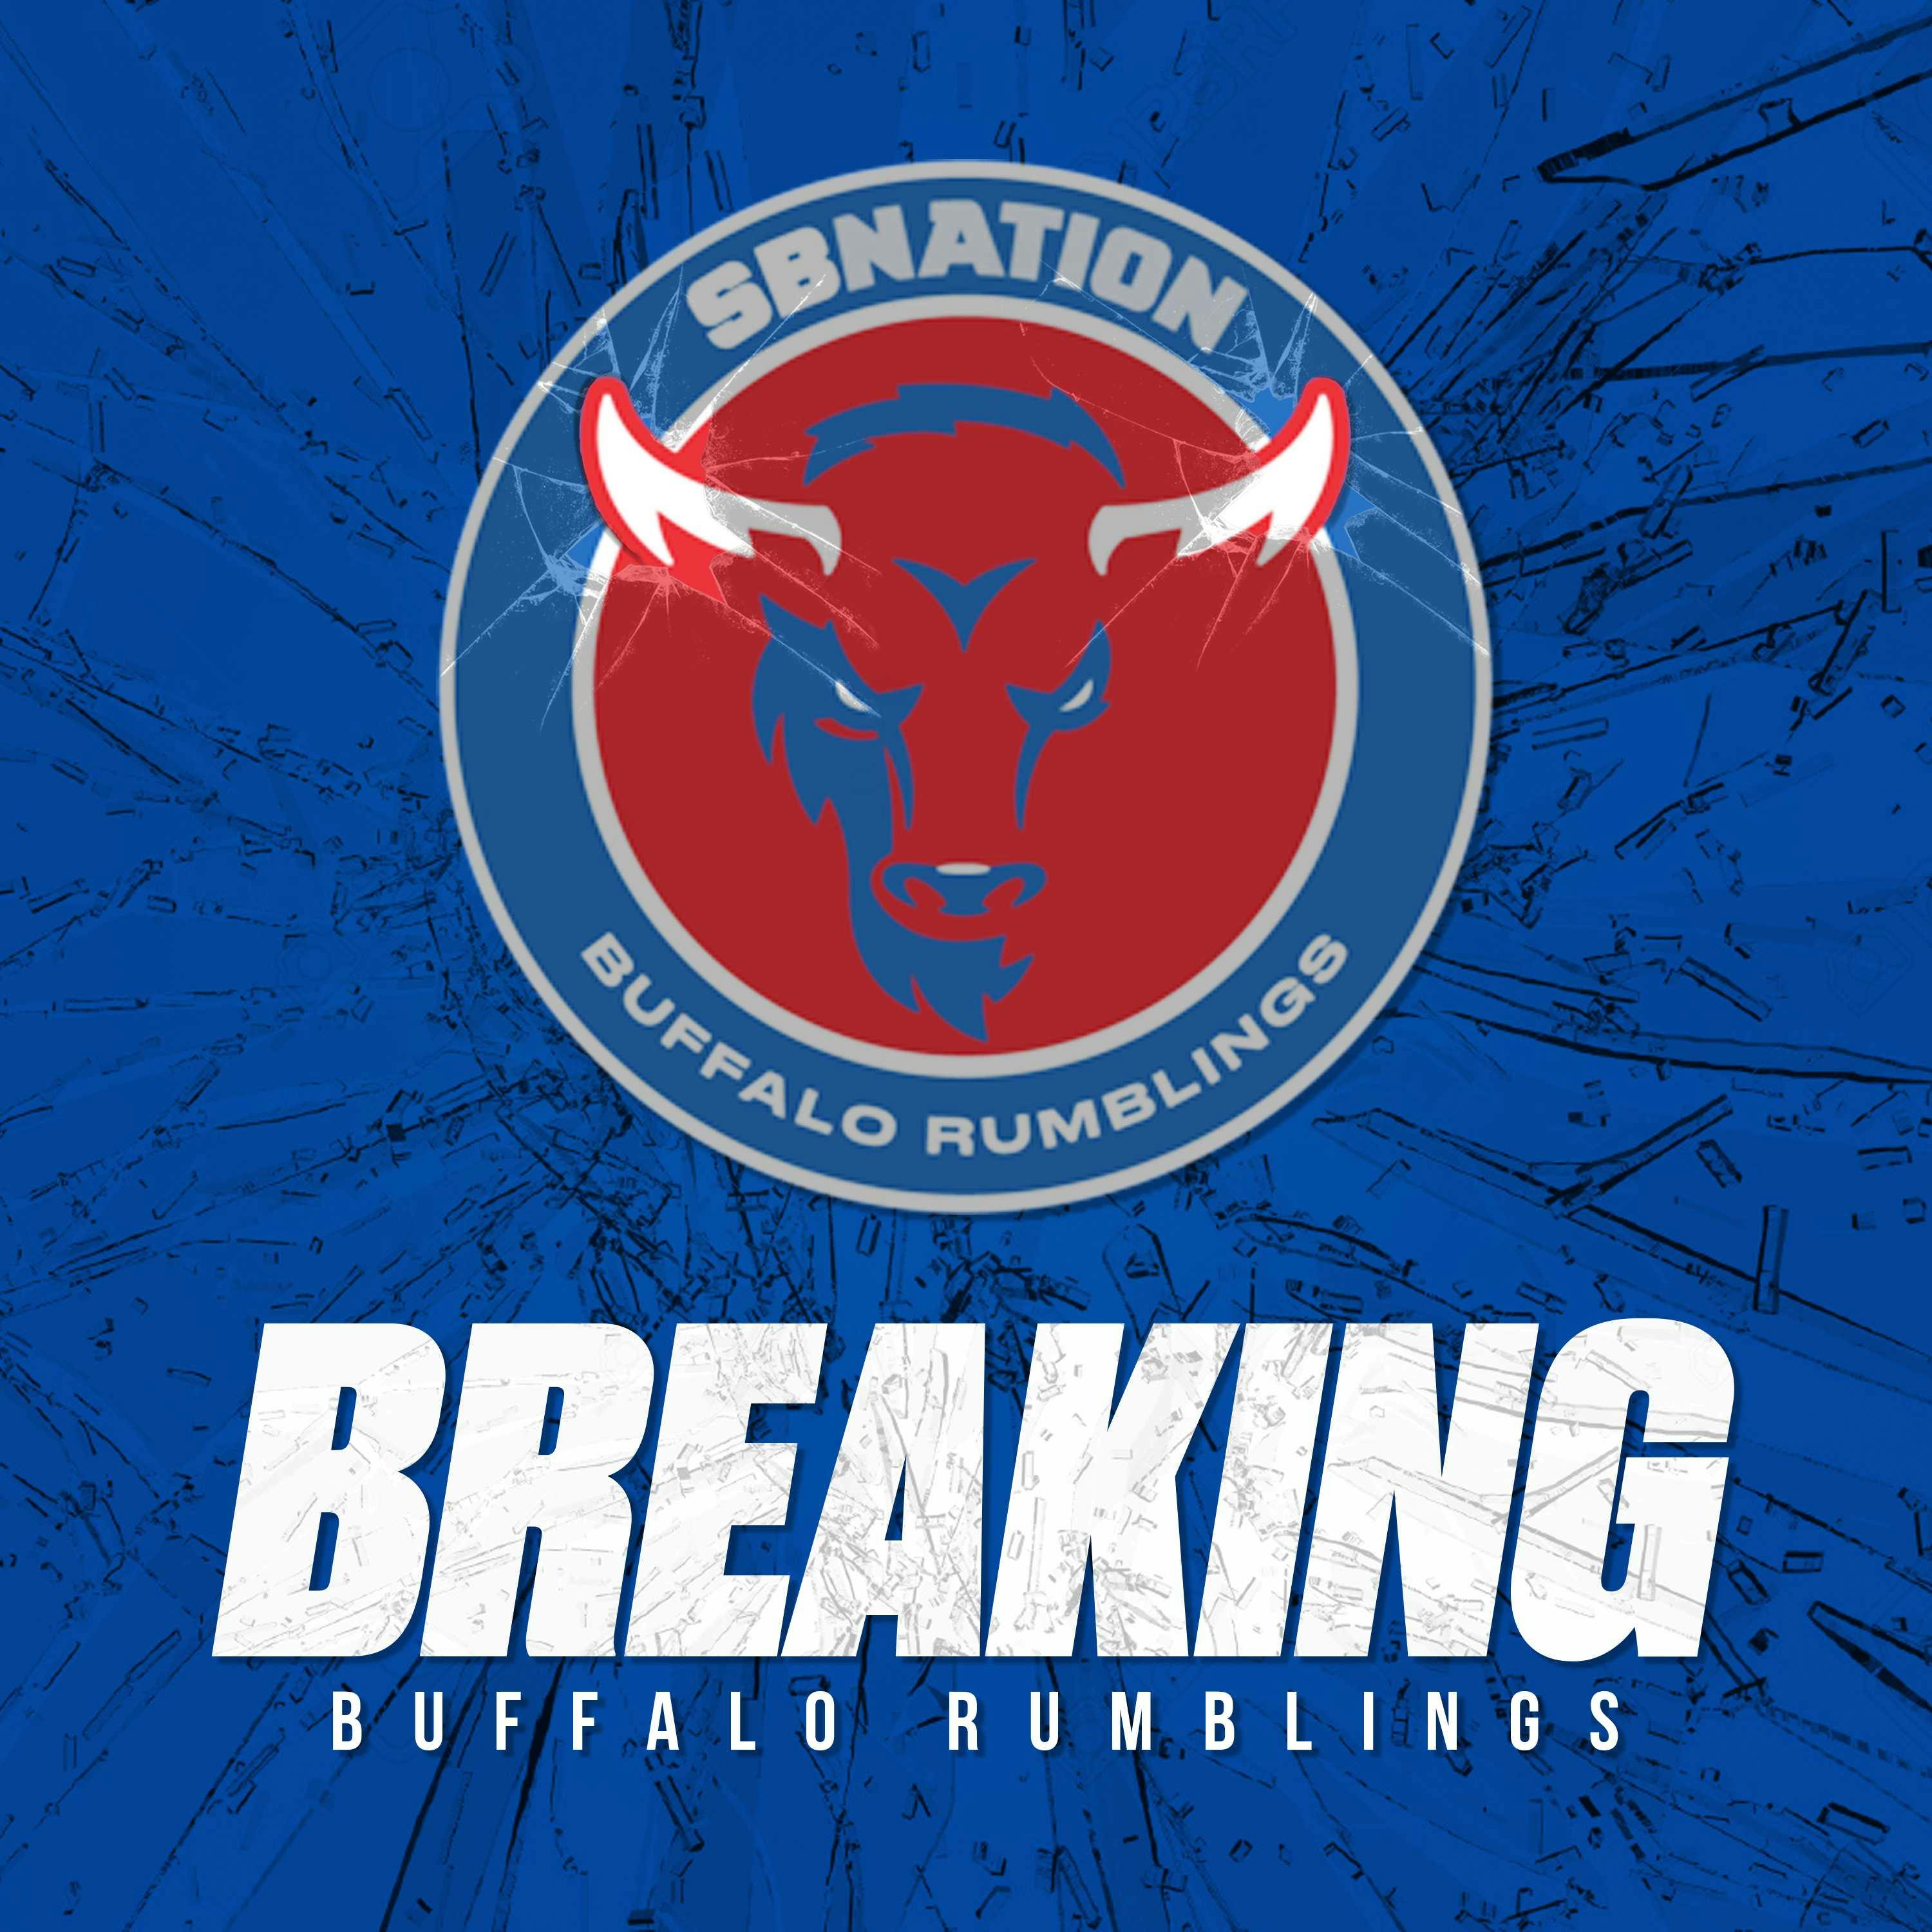 BBR: Who is the new fan favorite for the Buffalo Bills?